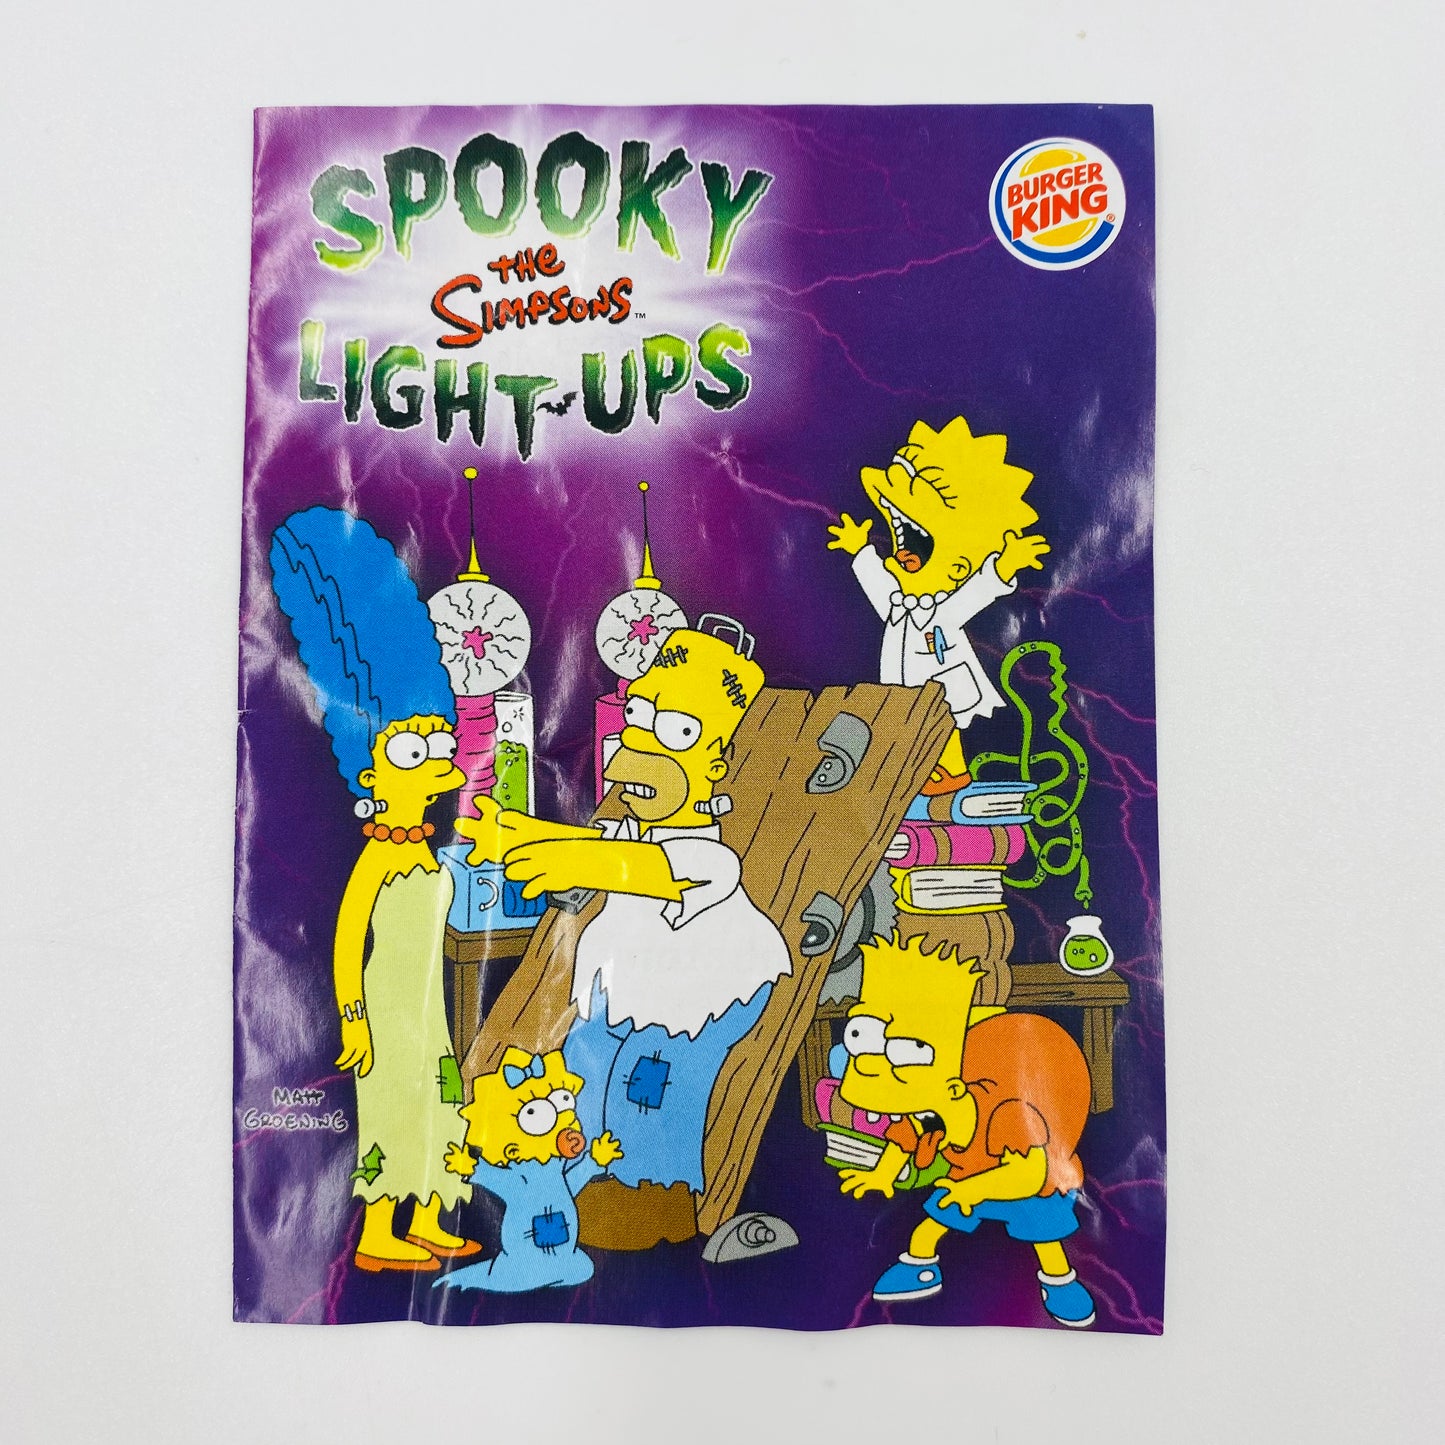 The Simpsons Spooky Light-Ups Ned Flanders Burger King Kids' Meals toy (2001) loose